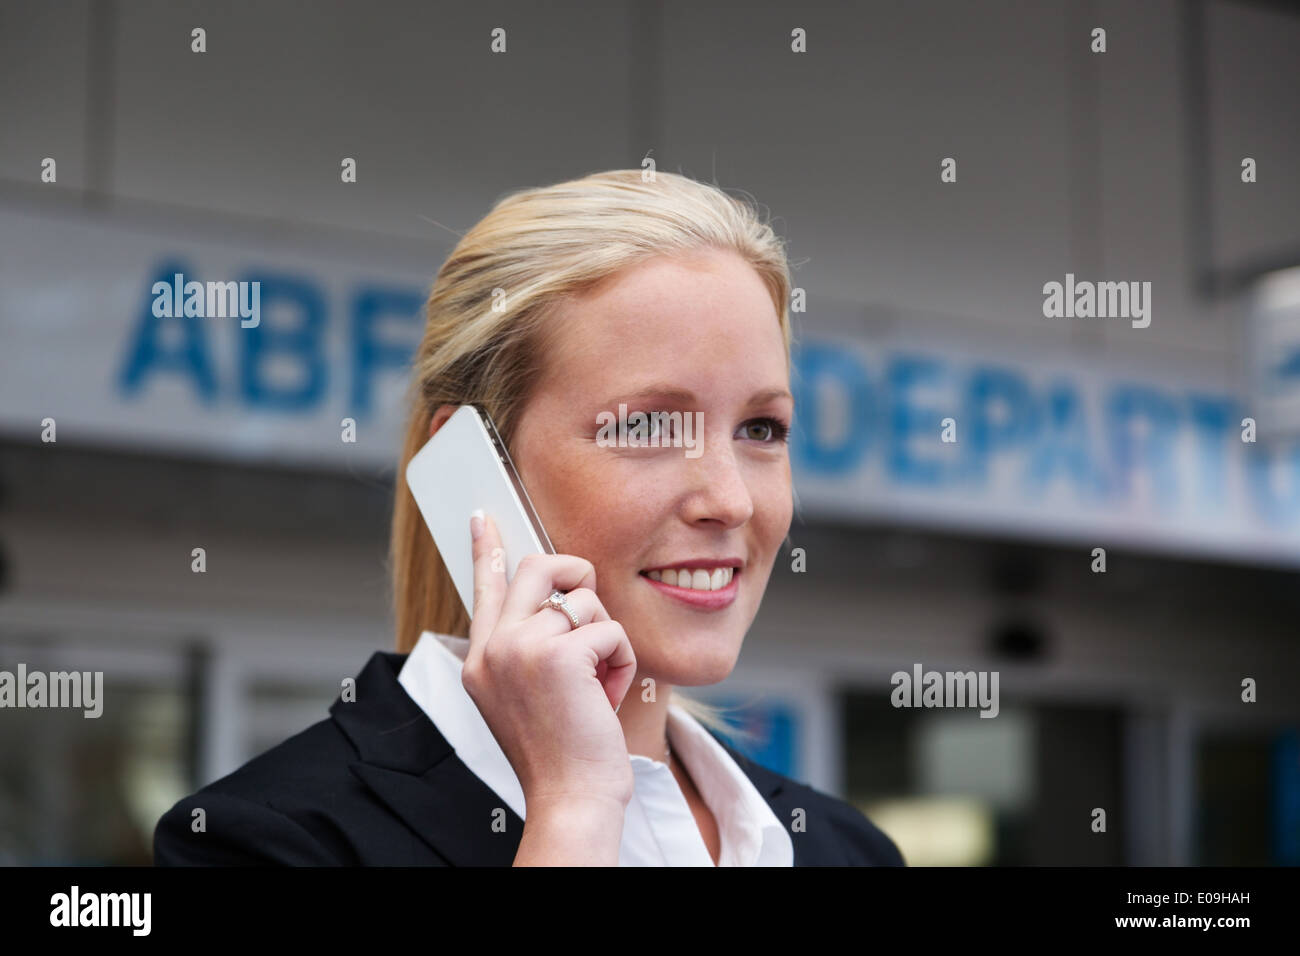 A businesswoman calls up her mobile phone at the airport. Roaminggebuehen by smartphones abroad, Eine Geschaeftsfrau telefoniert Stock Photo